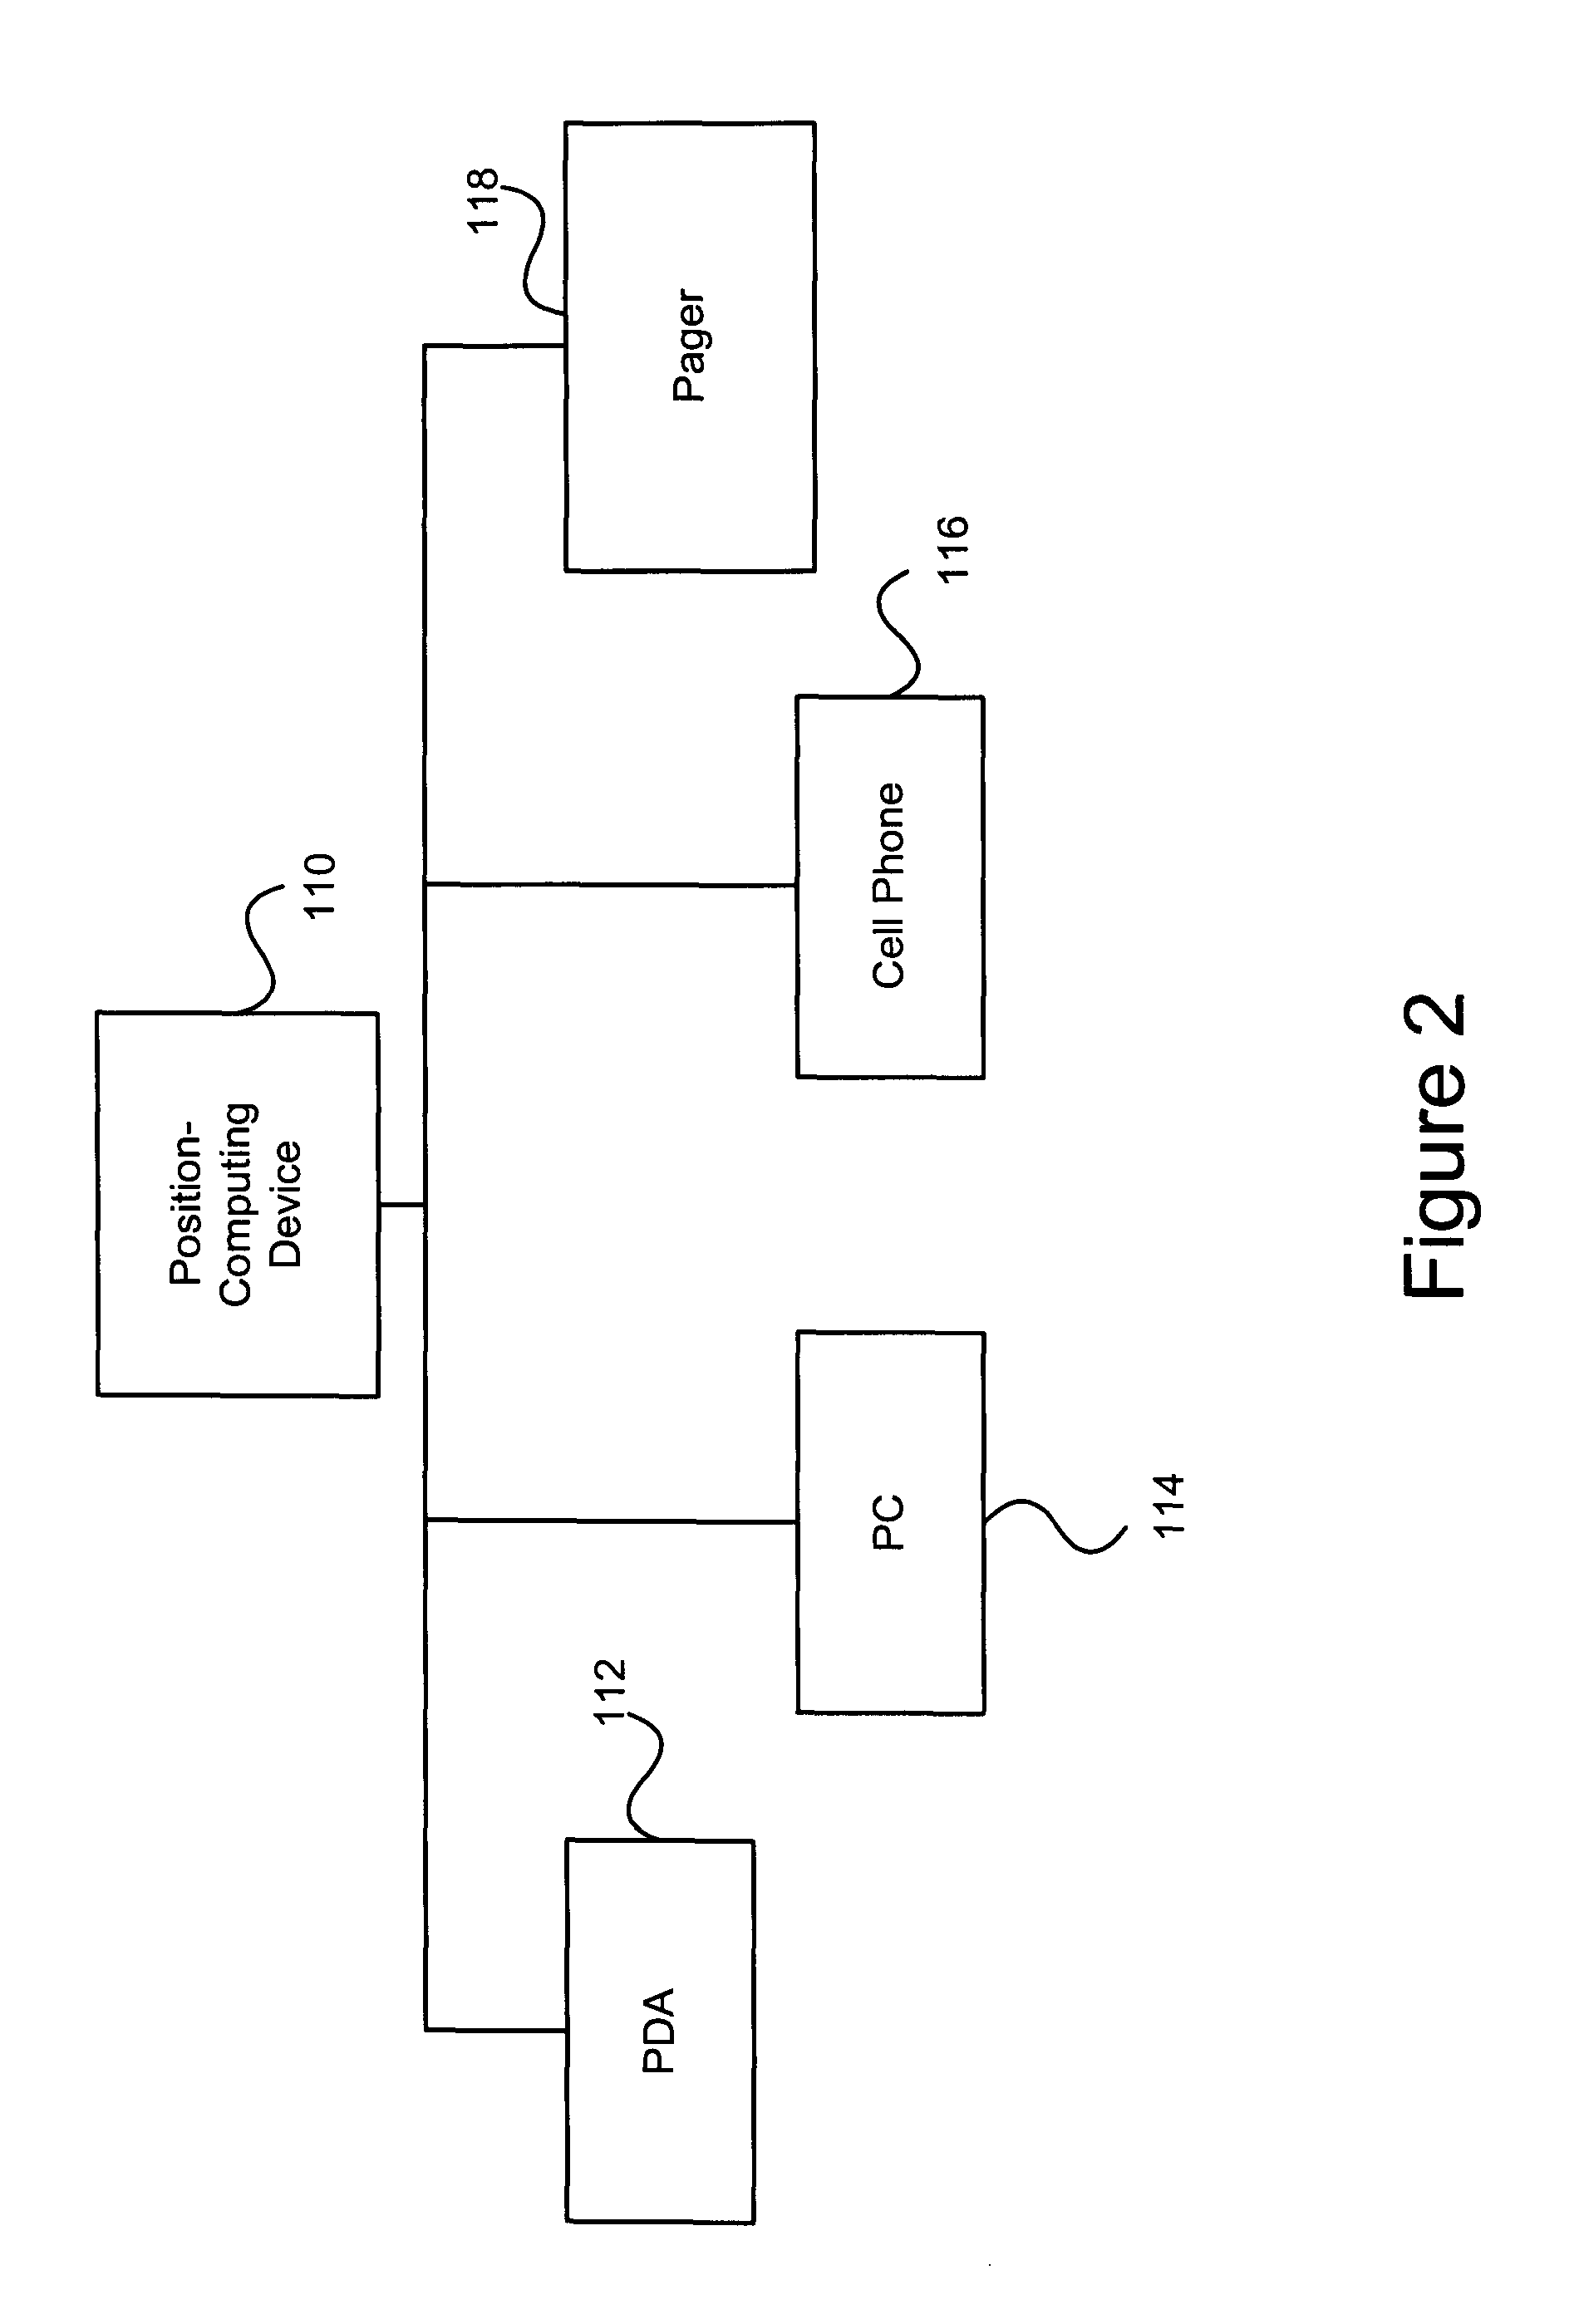 Inexpensive position sensing device